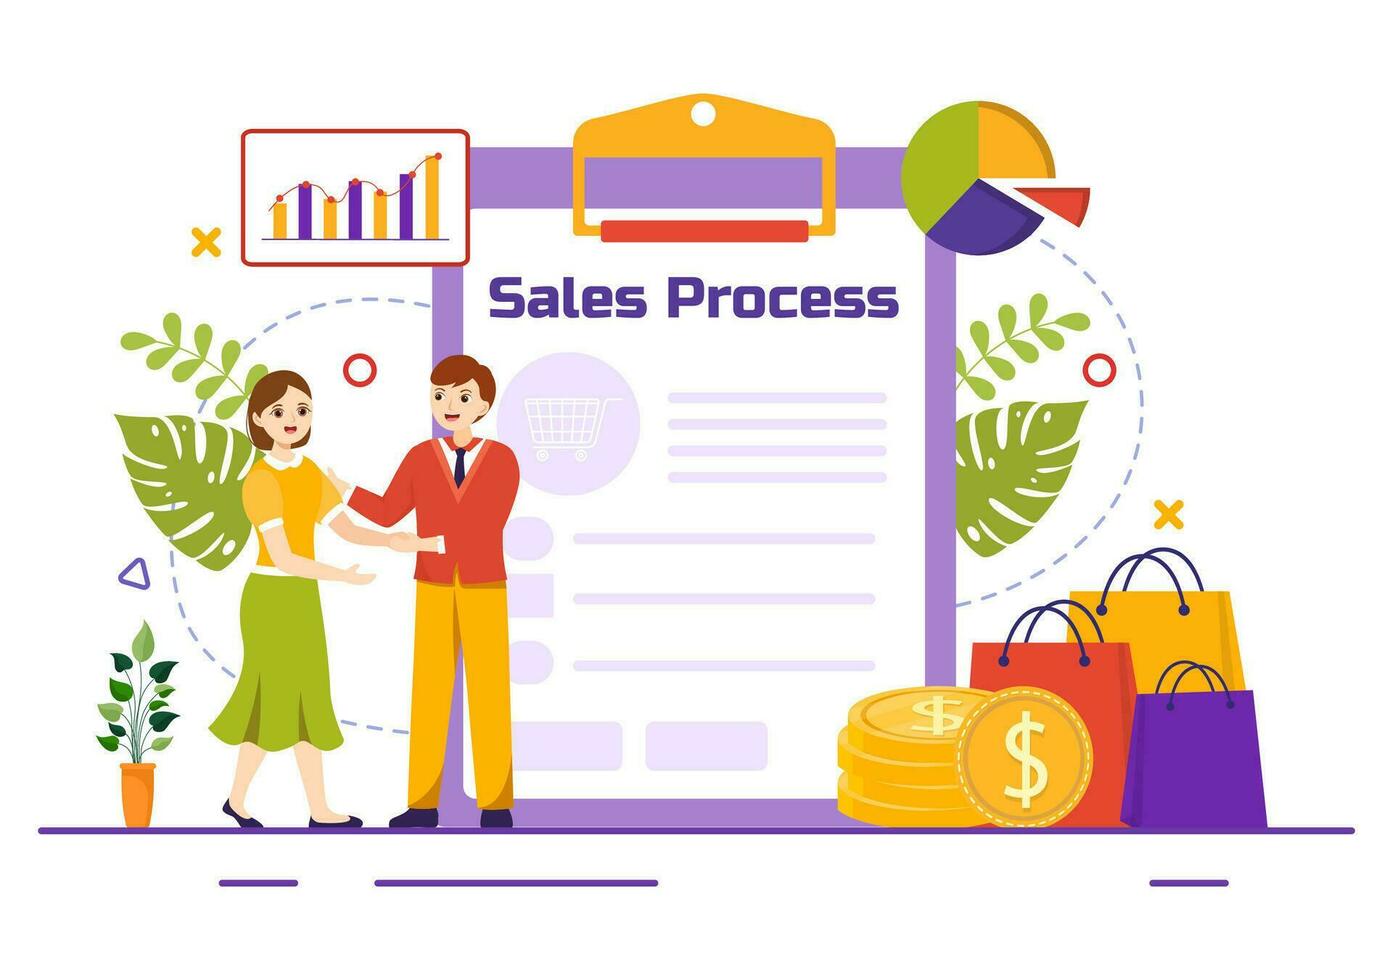 Sales Process Vector Illustration with Steps of Communication for Attracting New Customers and Making profit in Business Strategy Flat Background